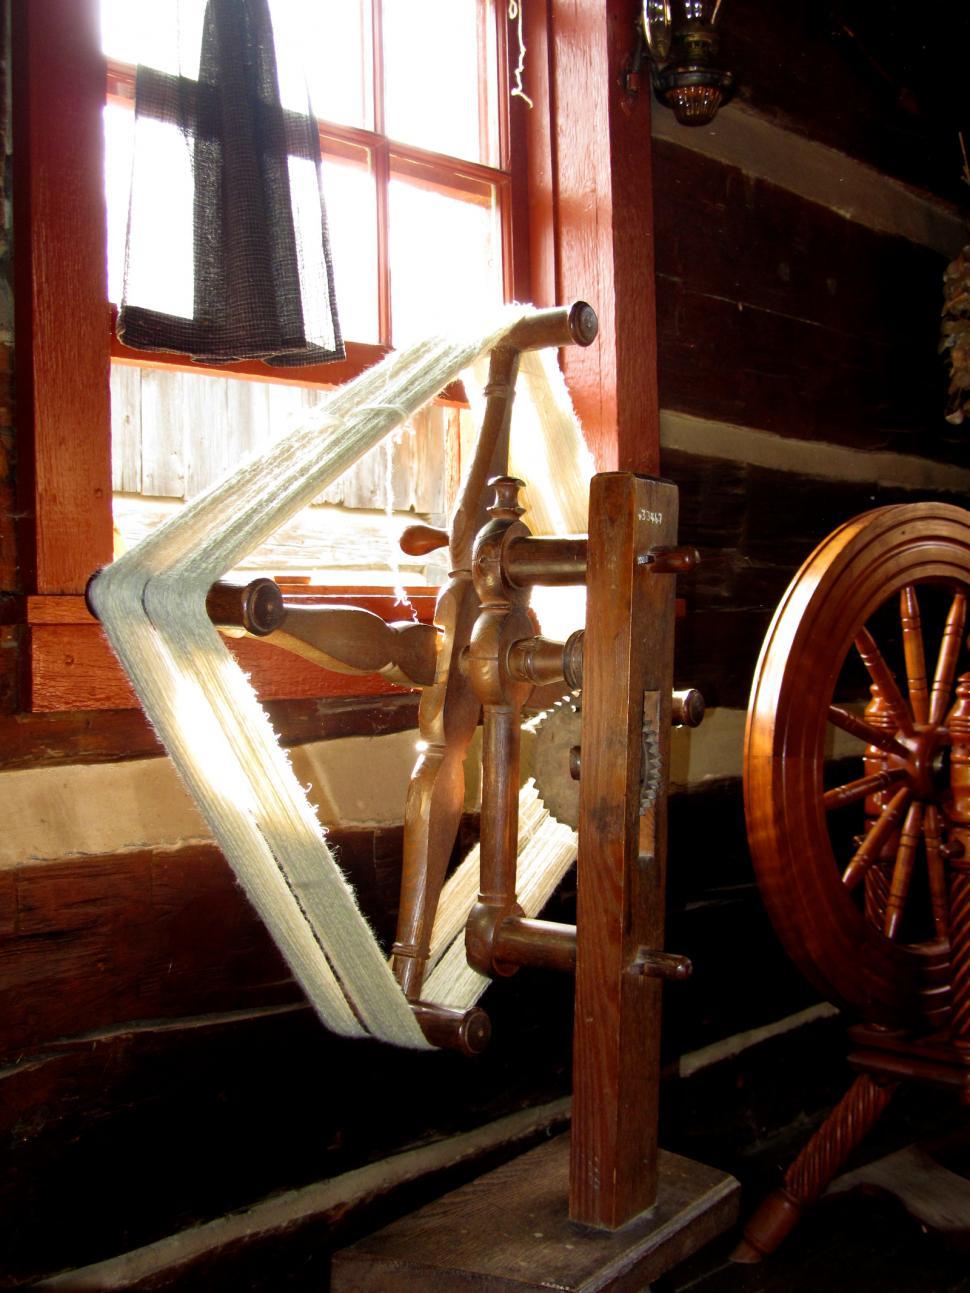 Free Image of Spinning Wheel in Front of Window 